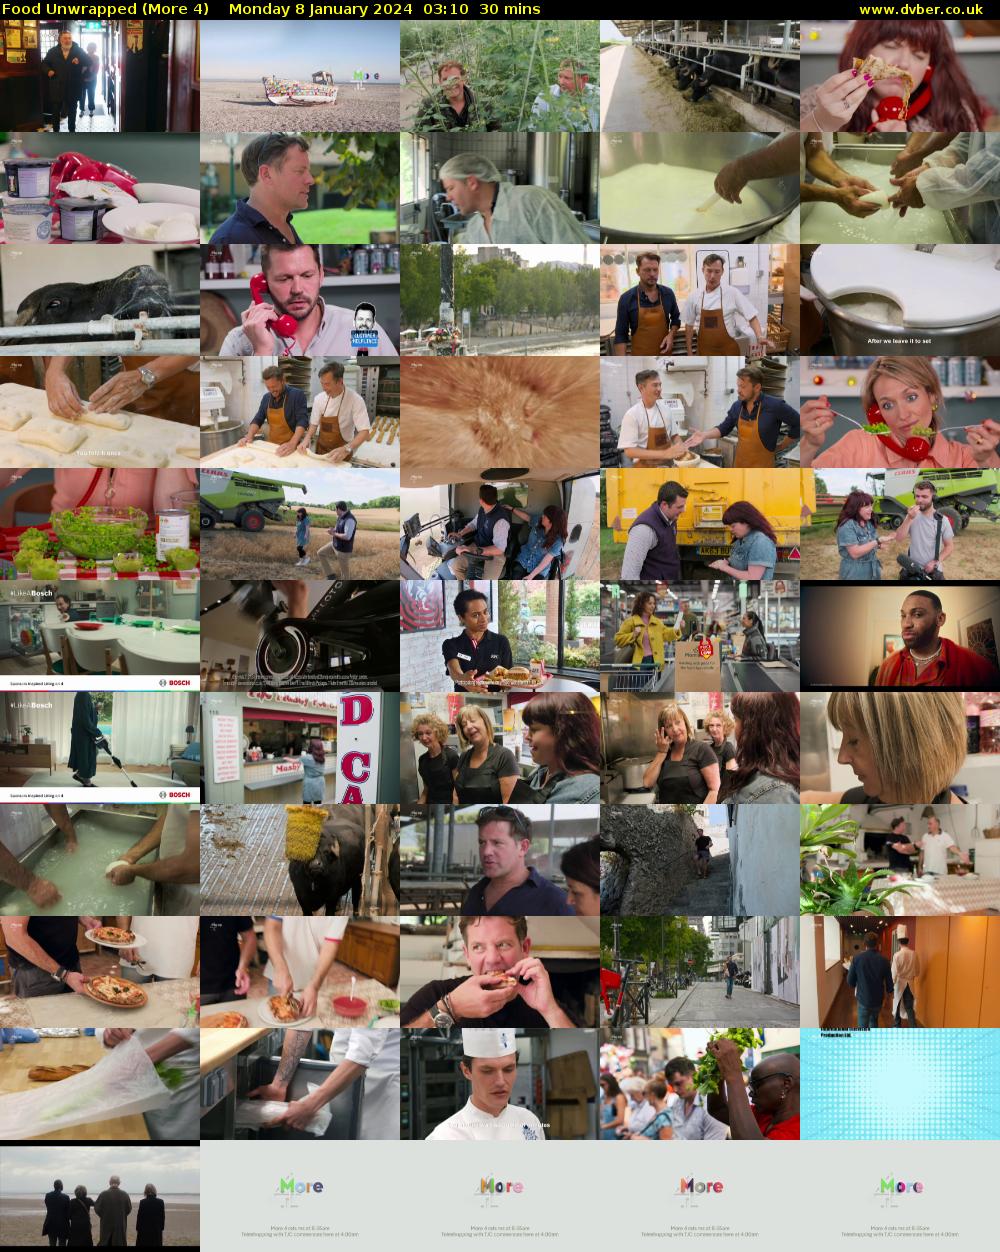 Food Unwrapped (More 4) Monday 8 January 2024 03:10 - 03:40